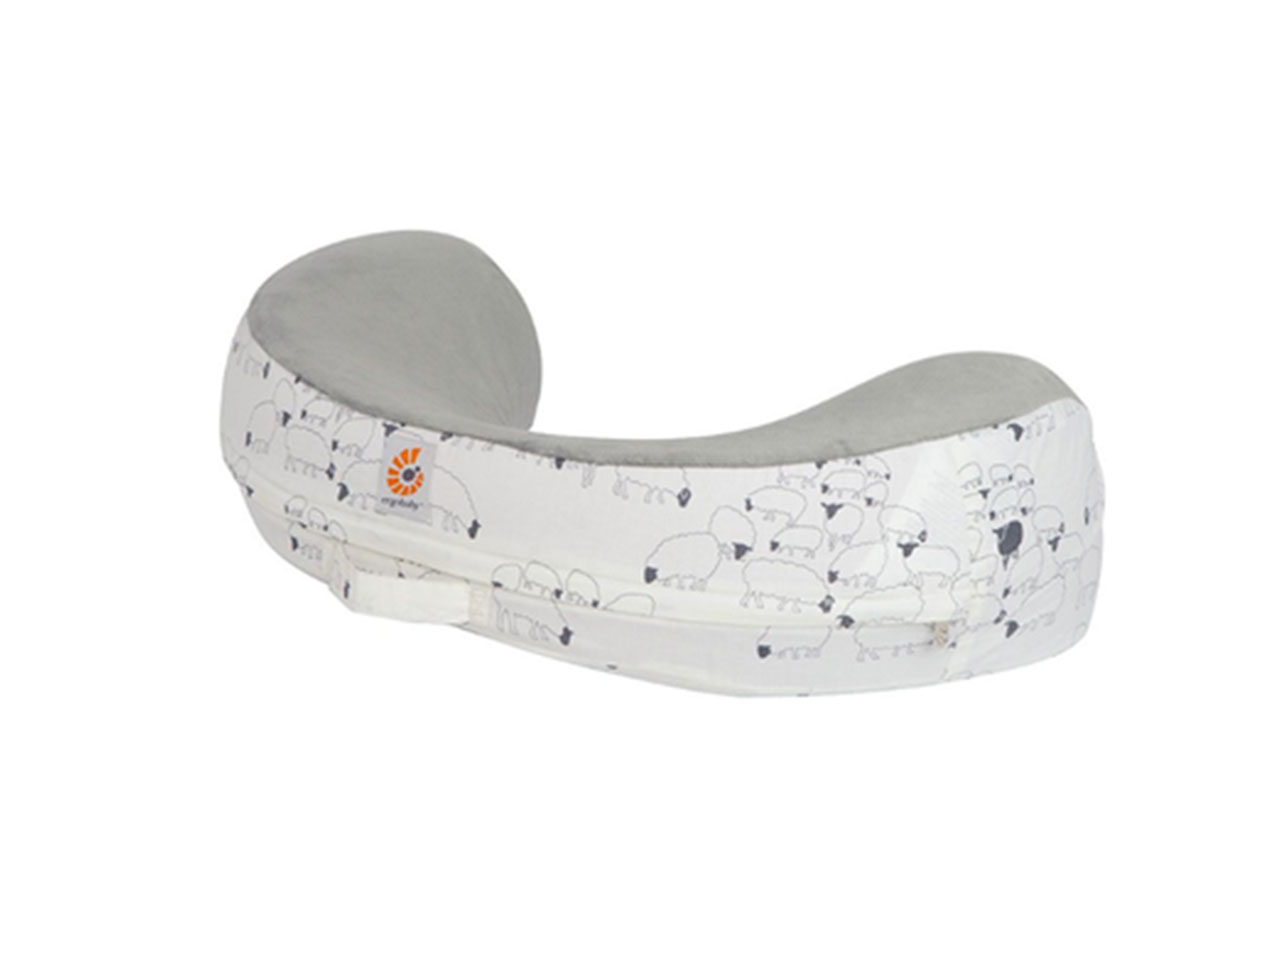 Ergobaby Natural Curve Nursing Pillow and Cover